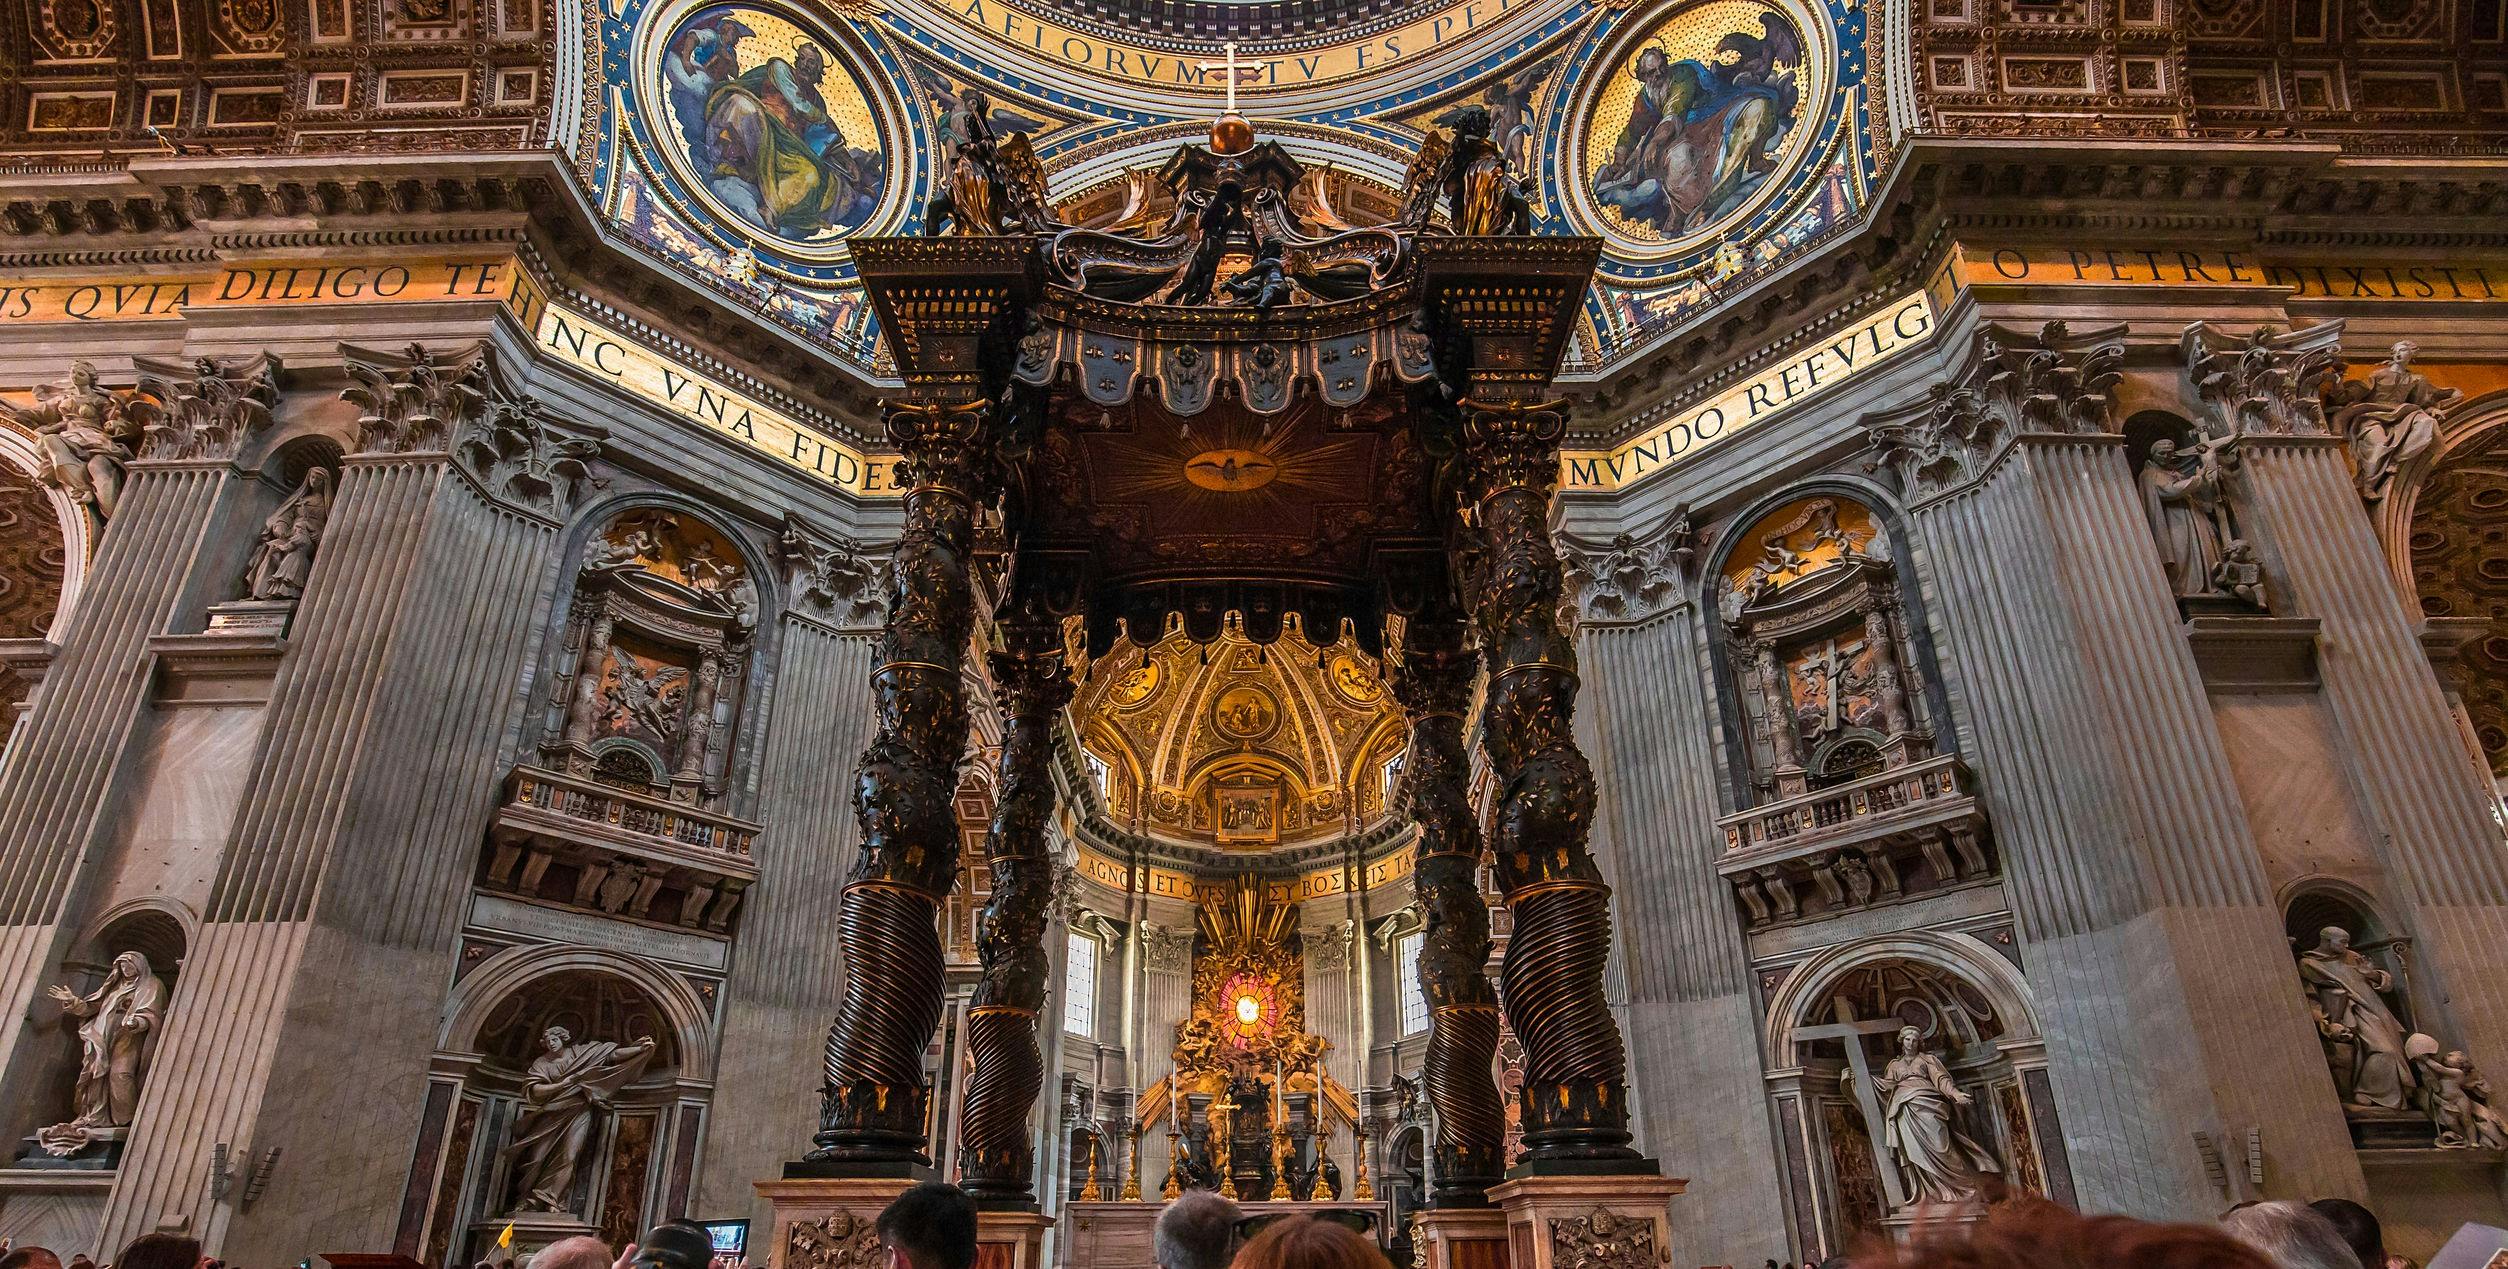 Virtual tour of St. Peter's Basilica from home. Musement